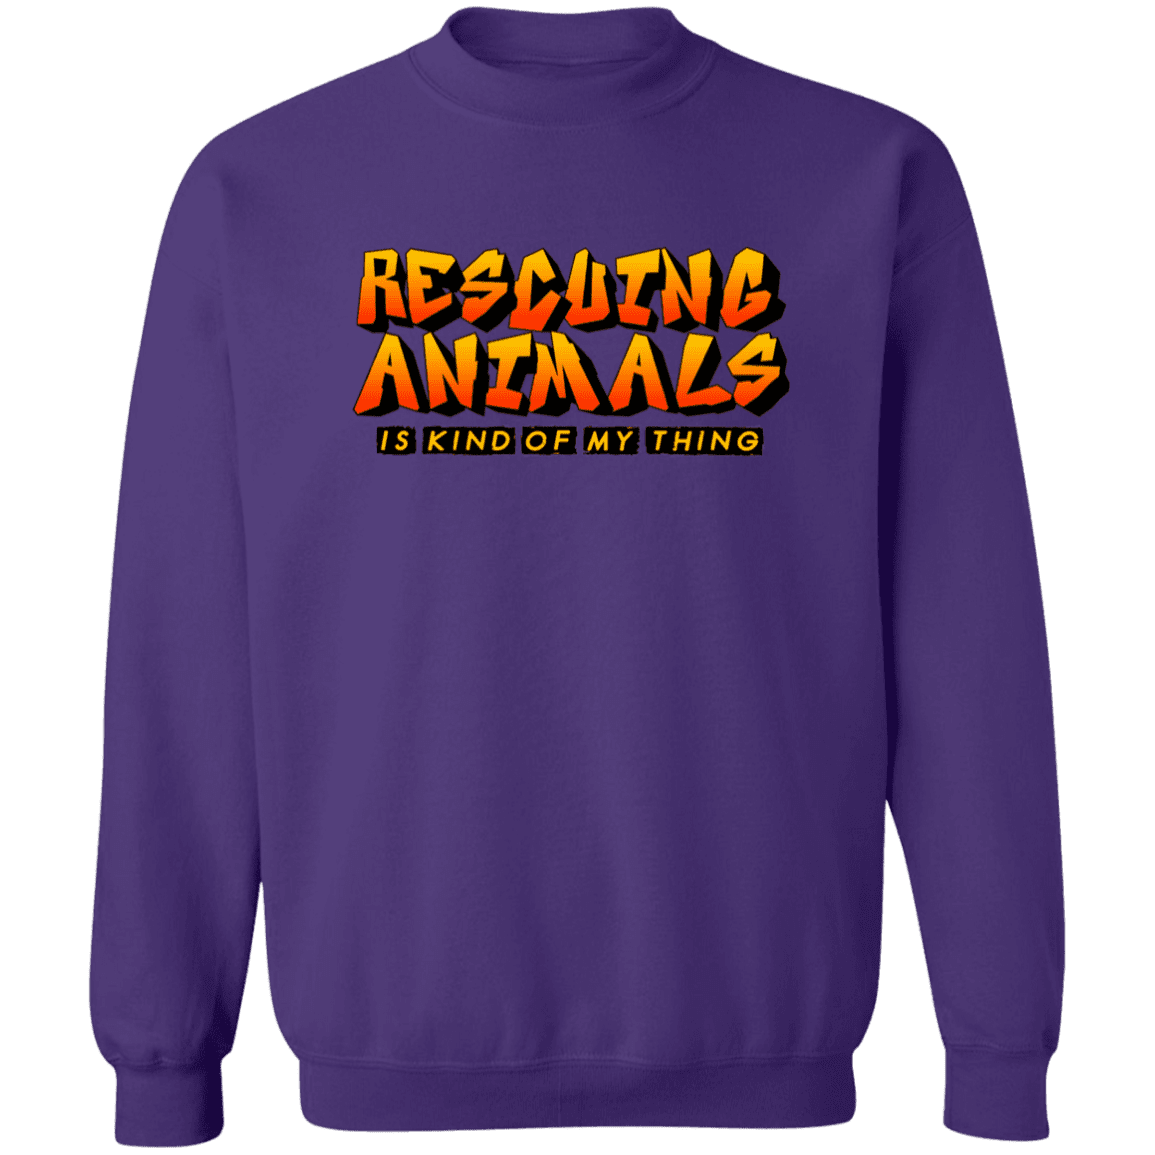 Rescuing Animals Is My Kind Of Thing - Sweatshirt.